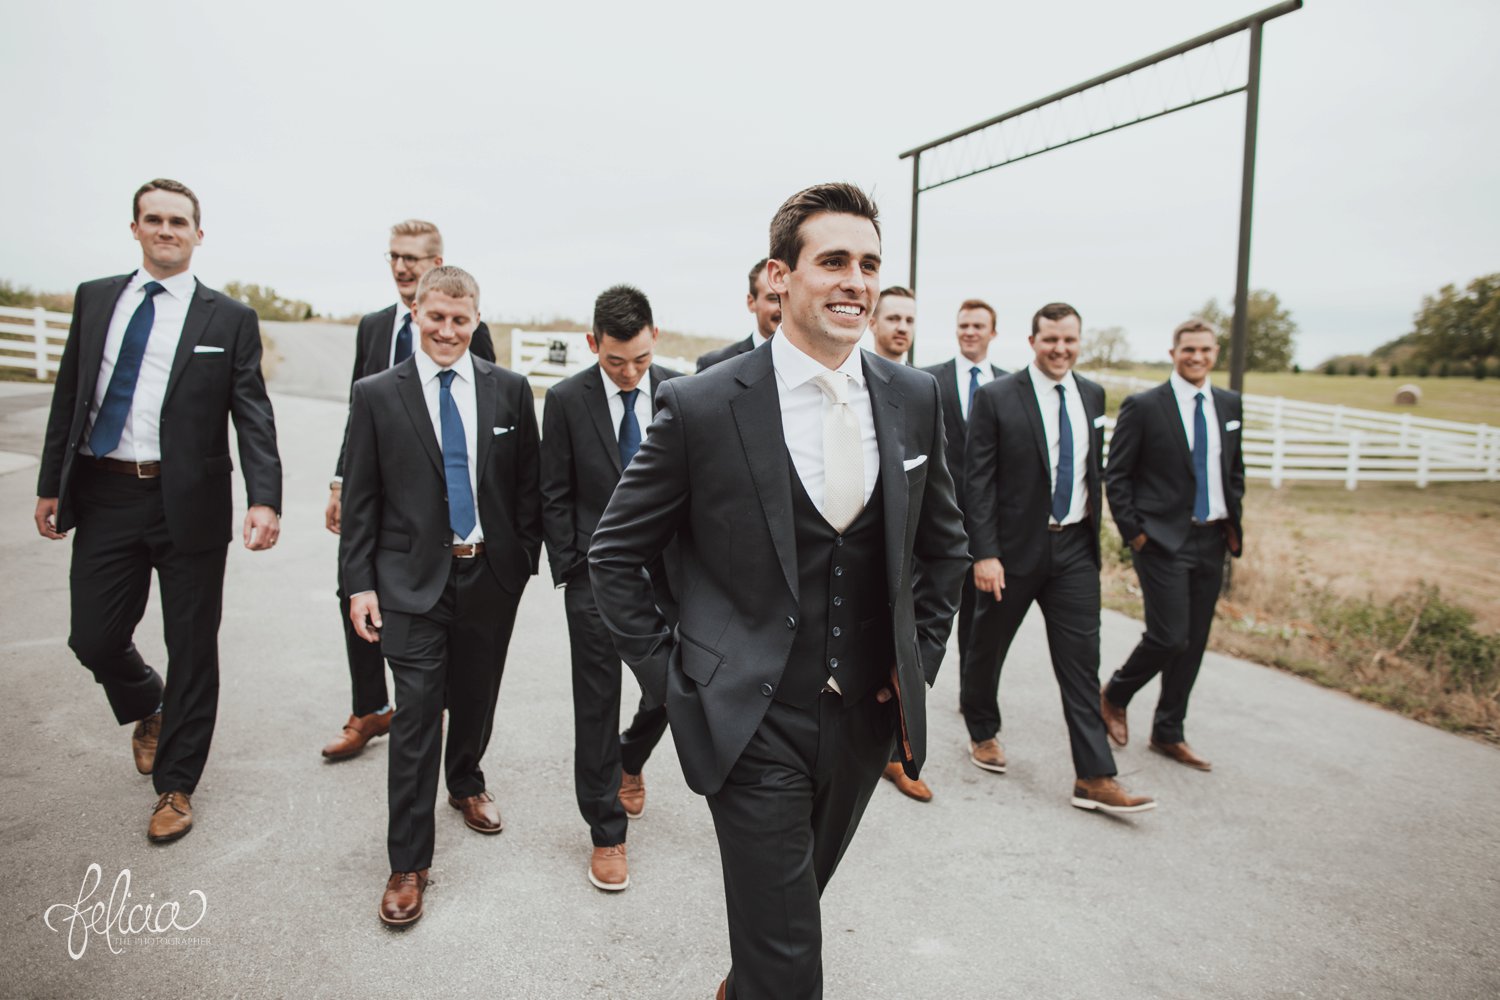 images by feliciathephotographer.com | destination wedding photographer | kansas city | eighteen ninety | classic | groomsmen portraits | walking | candid | cream tie | navy suit | royal blue | J. H. & sons clothier | brown leather shoes | country side | white picket fence | 